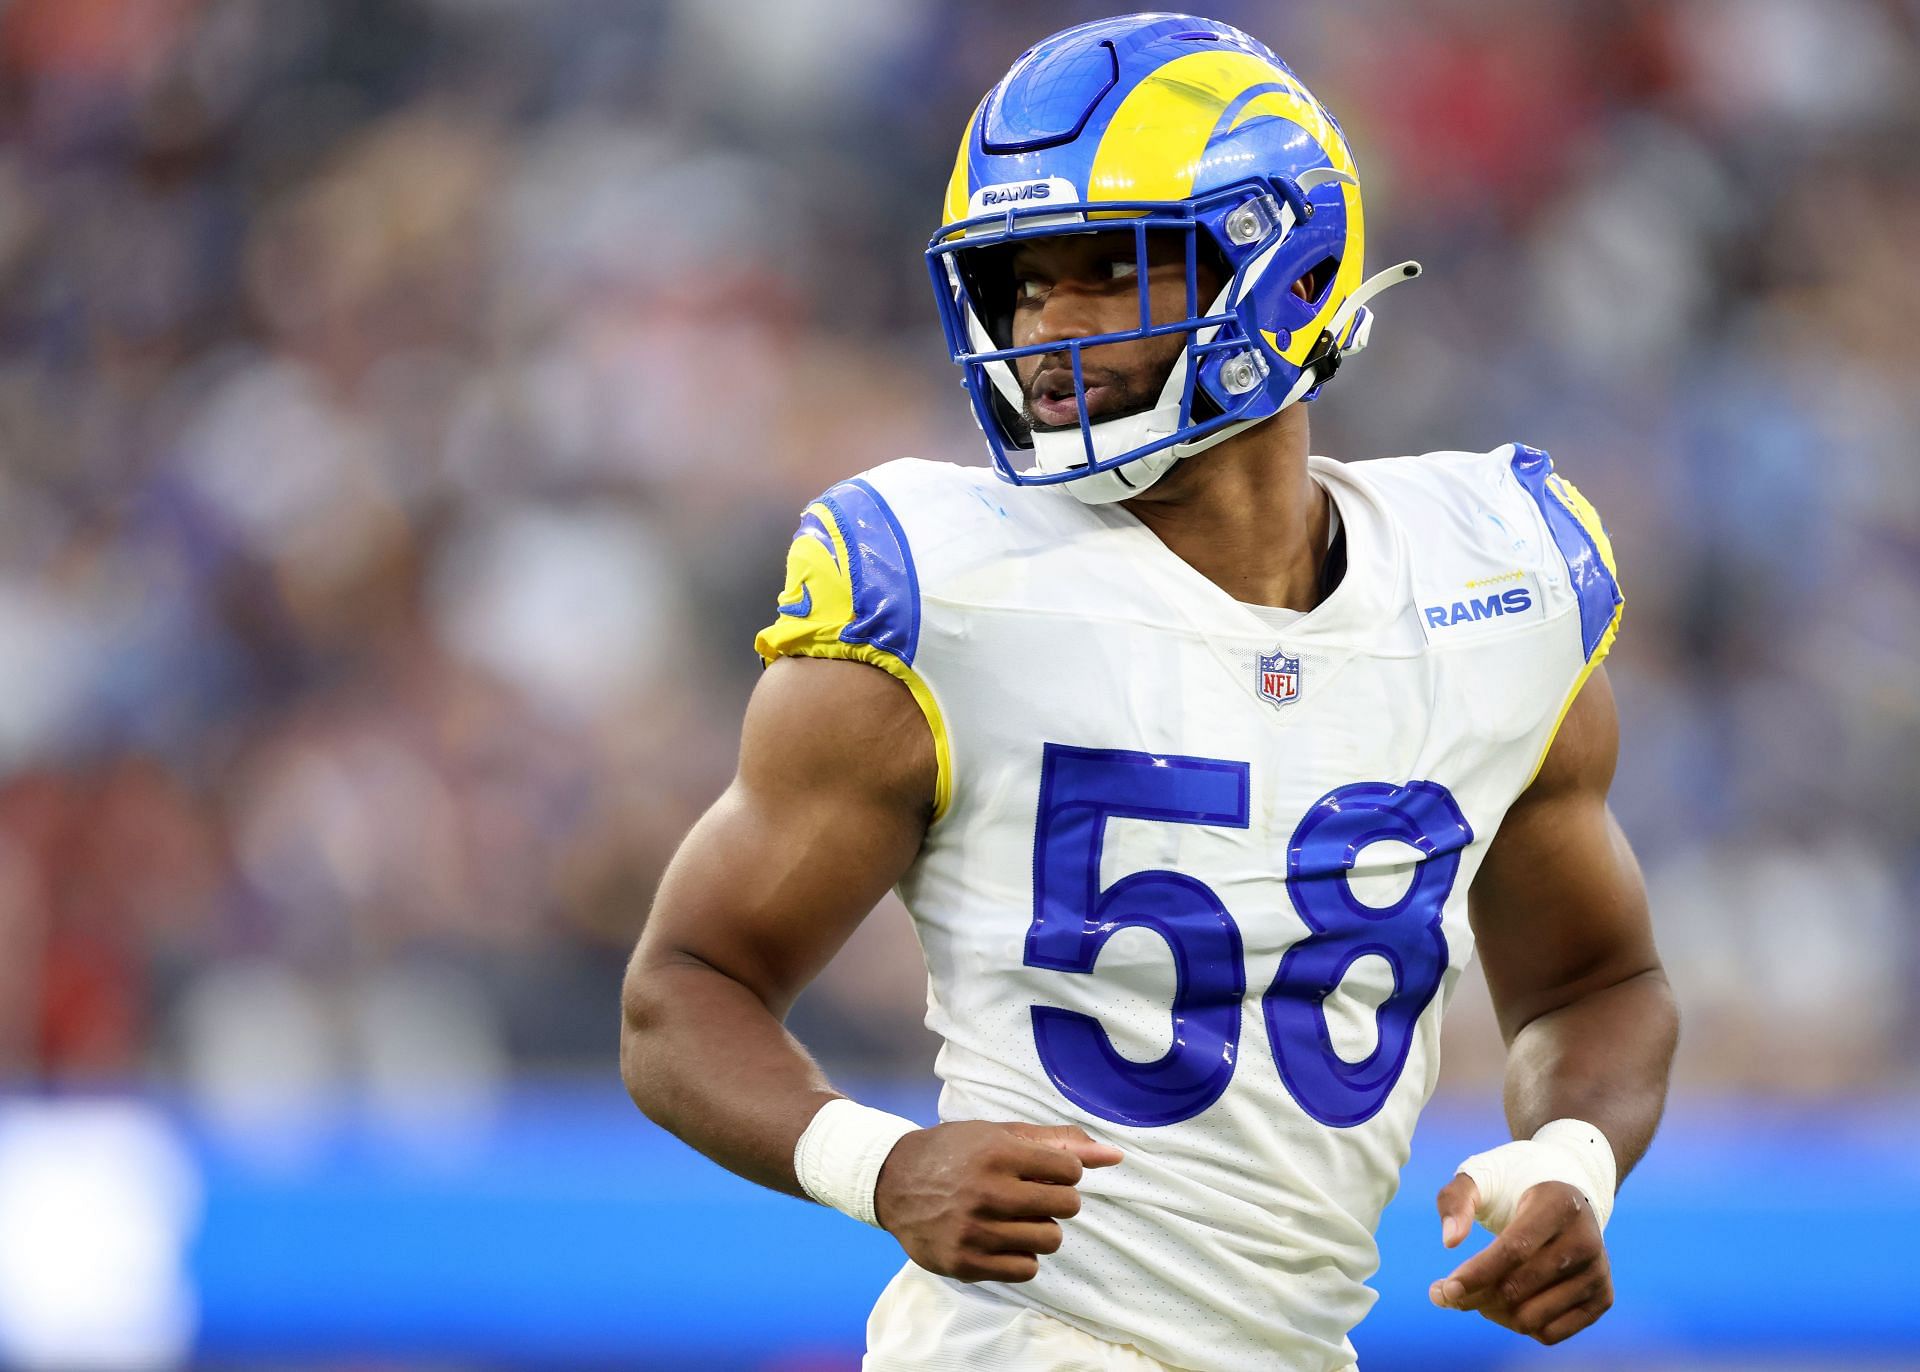 Oregon’s 10 best NFL players in 2022